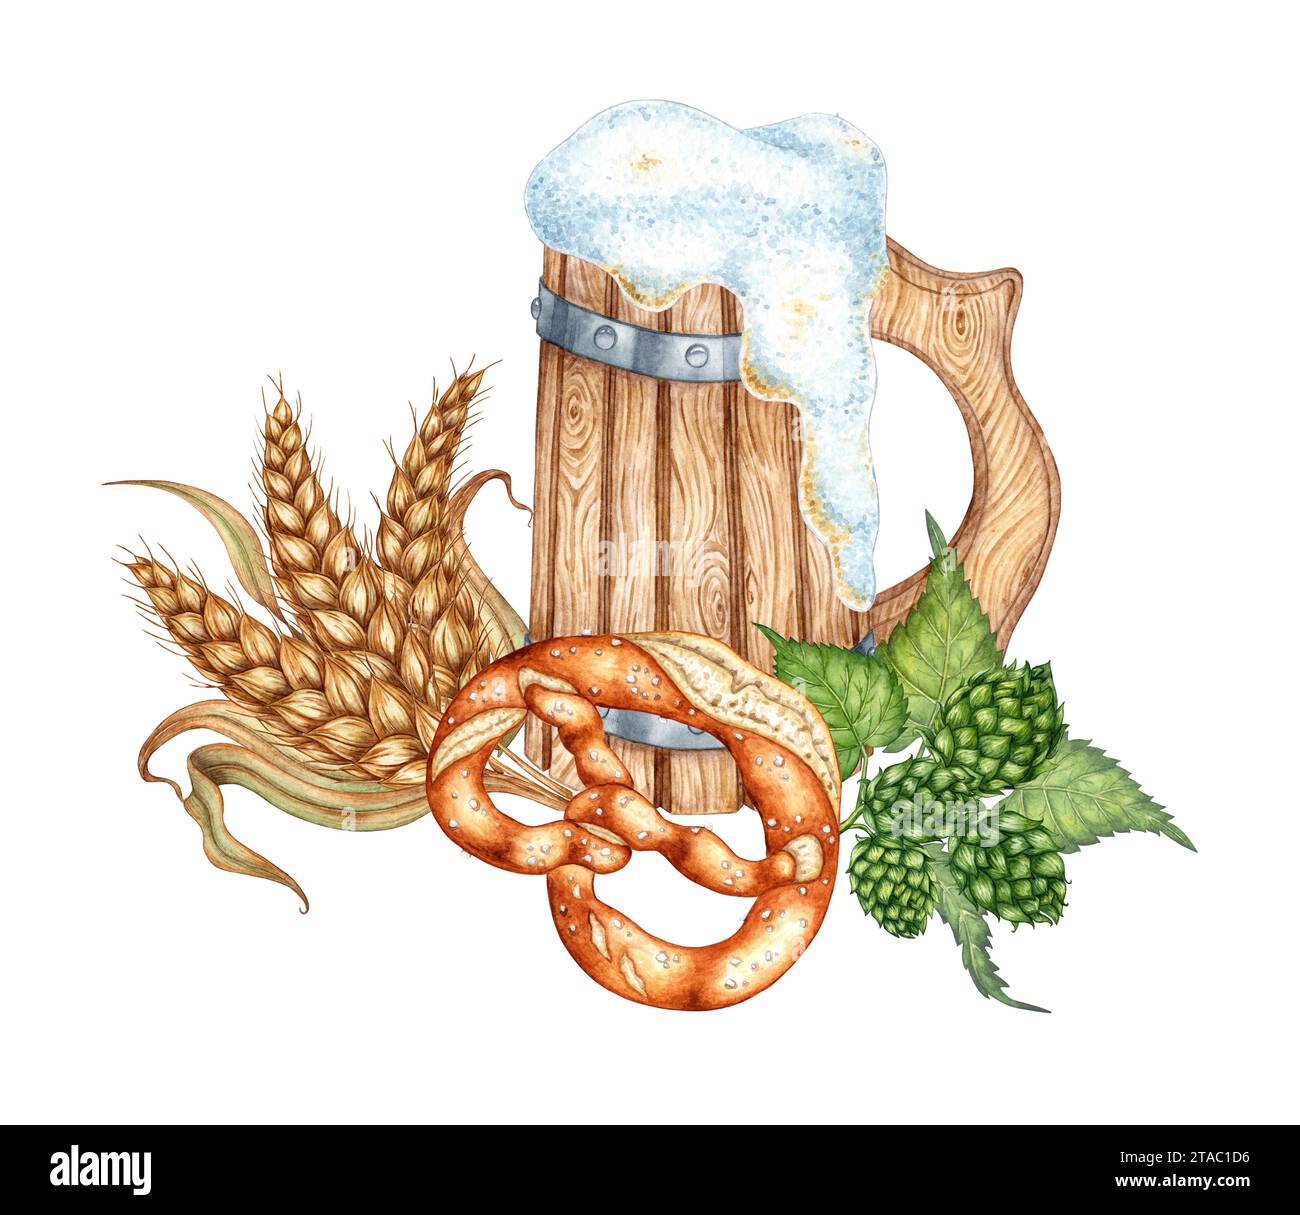 Watercolor illustration of beer with foam in a mug with hops, ears of wheat and pretzel. Harvest festival, Oktoberfest beer festival. Compositions for Stock Photo